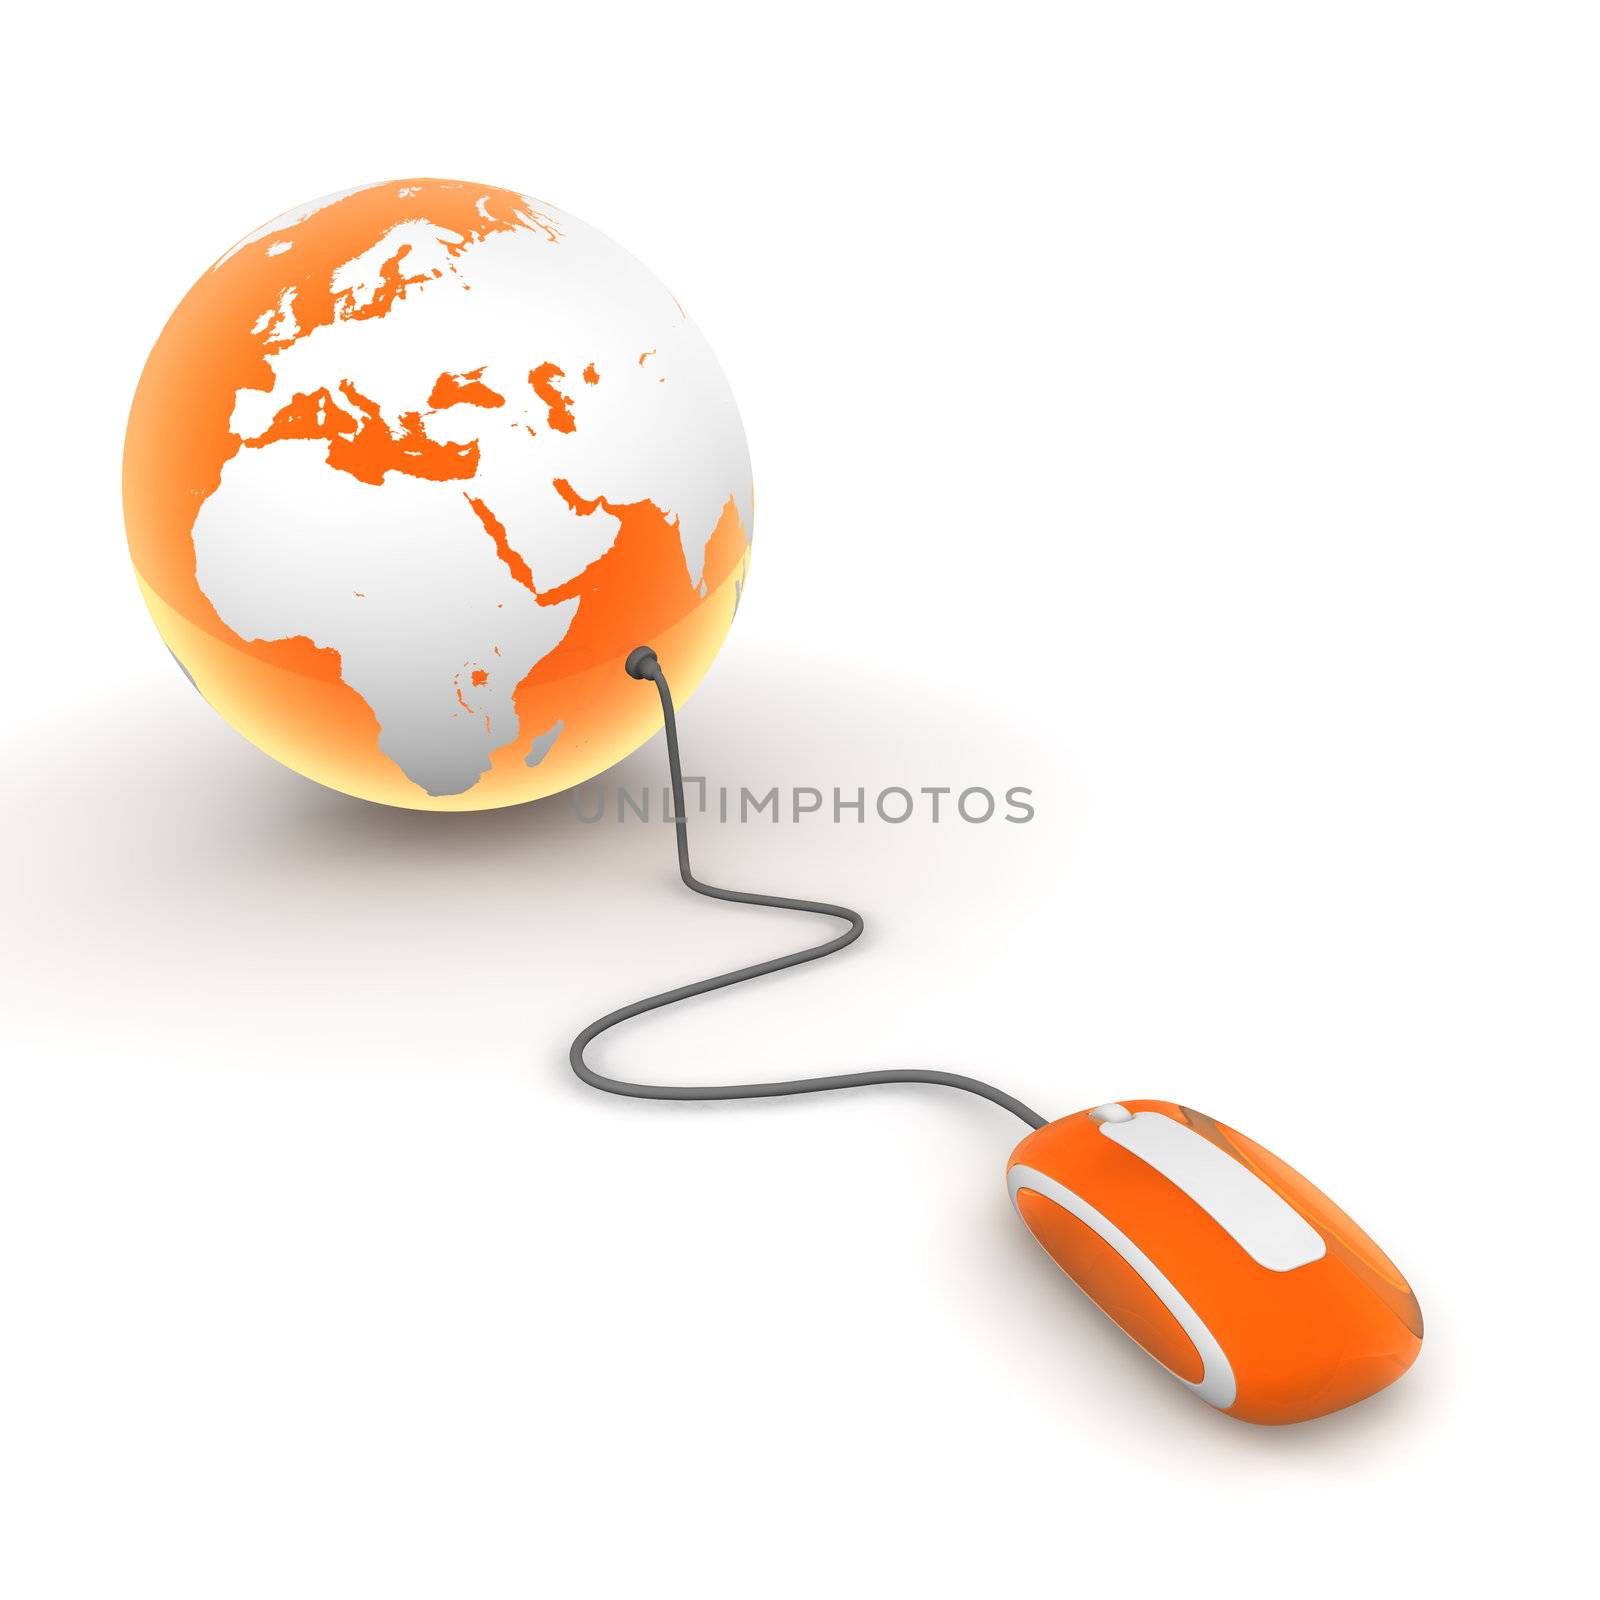 green translucent computer mouse connected to a orange glossy globe